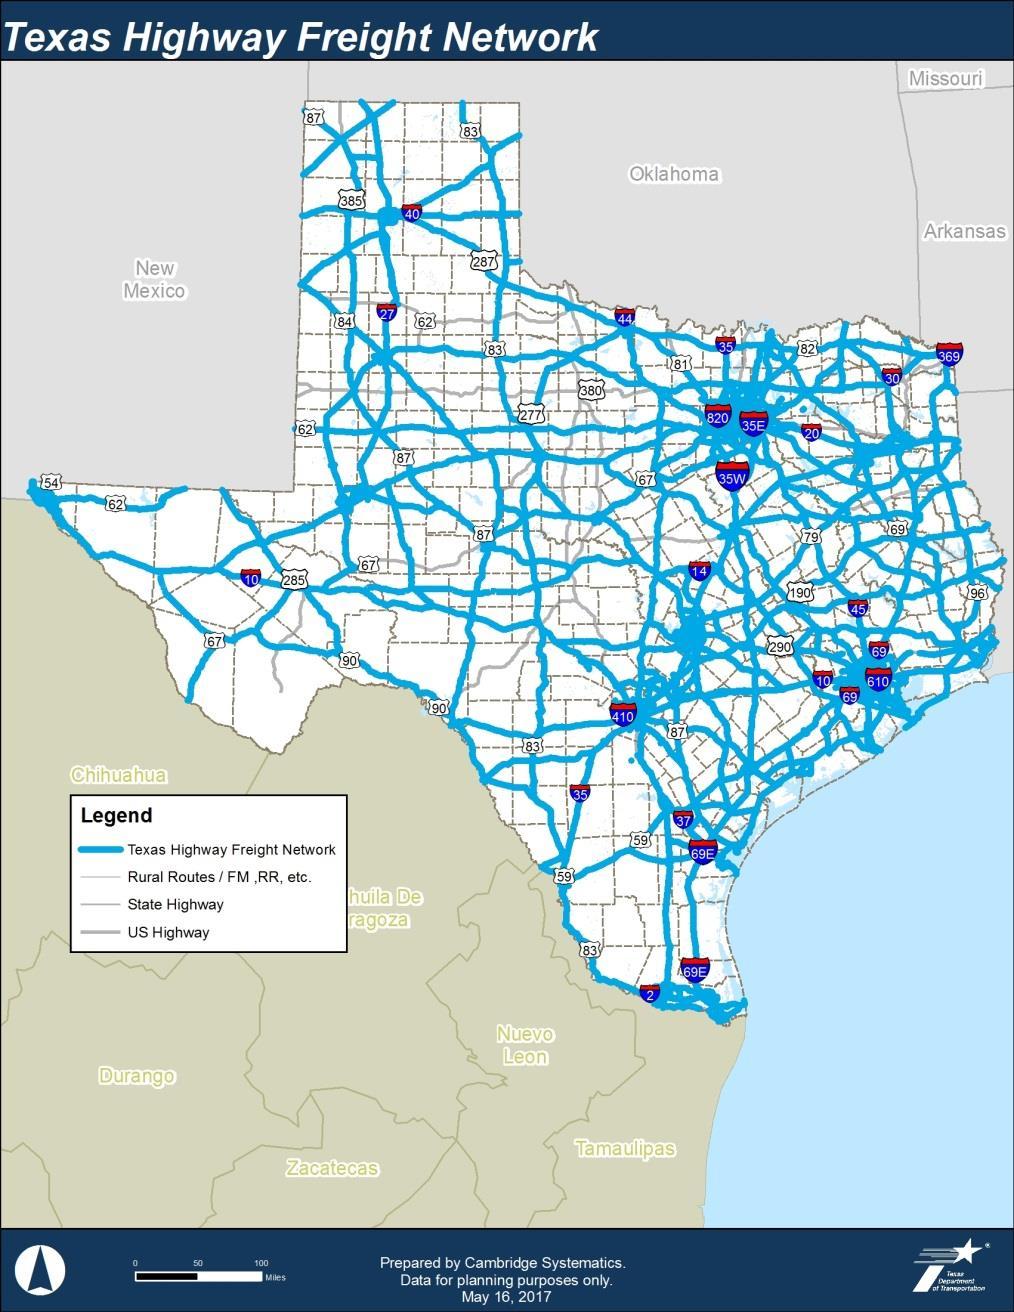 Texas Highway Freight Network (THFN) Designation Based on recommendations from TxFAC, the Draft Texas Highway Freight Network includes: USDOT designated National Highway Freight Network; All